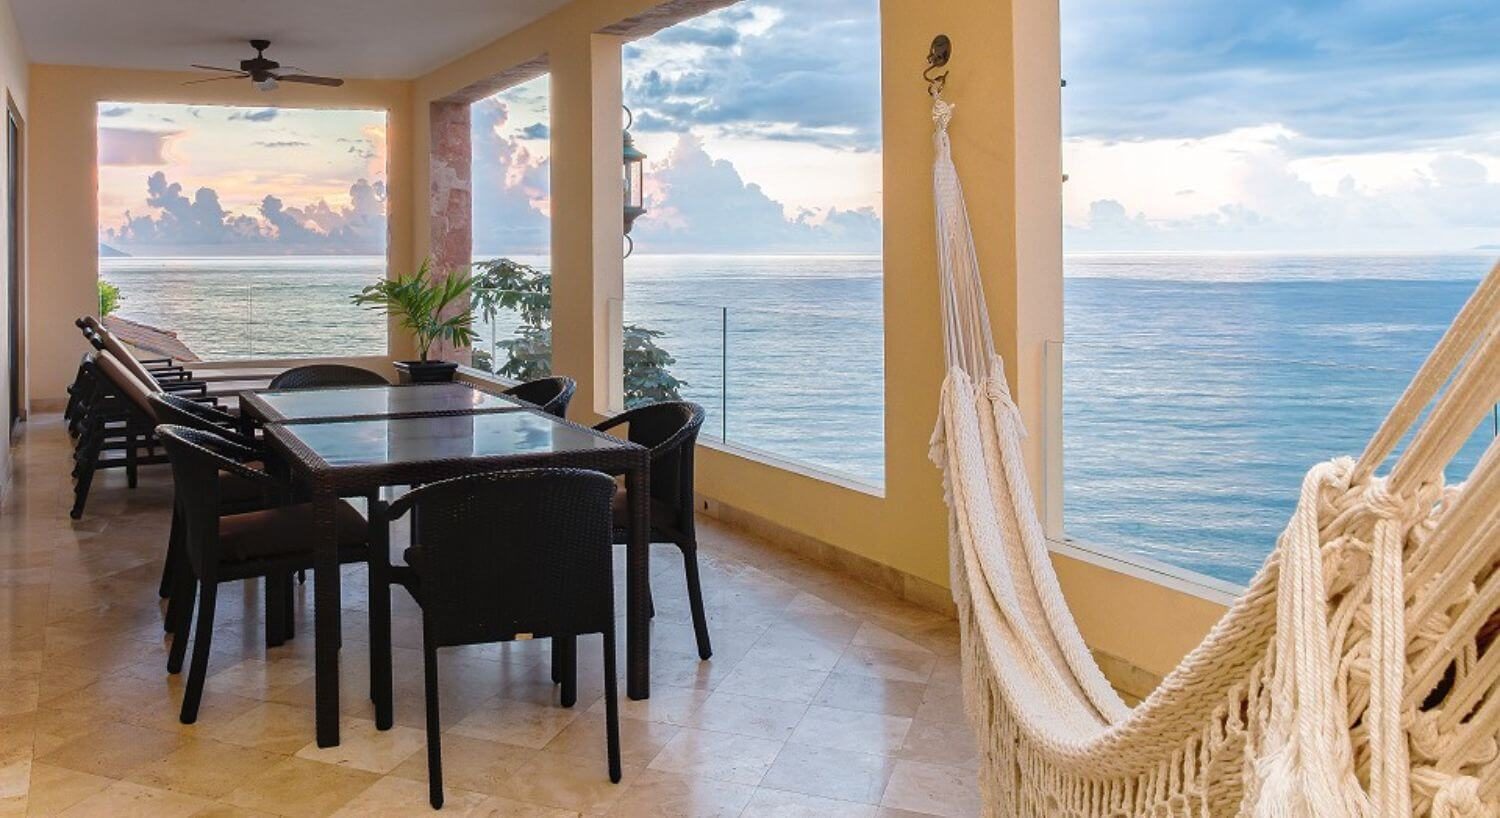 A private outdoor balcony with brown wicker patio furniture including tables and chairs, lounge chairs, and a hammock, with beautiful ocean views.